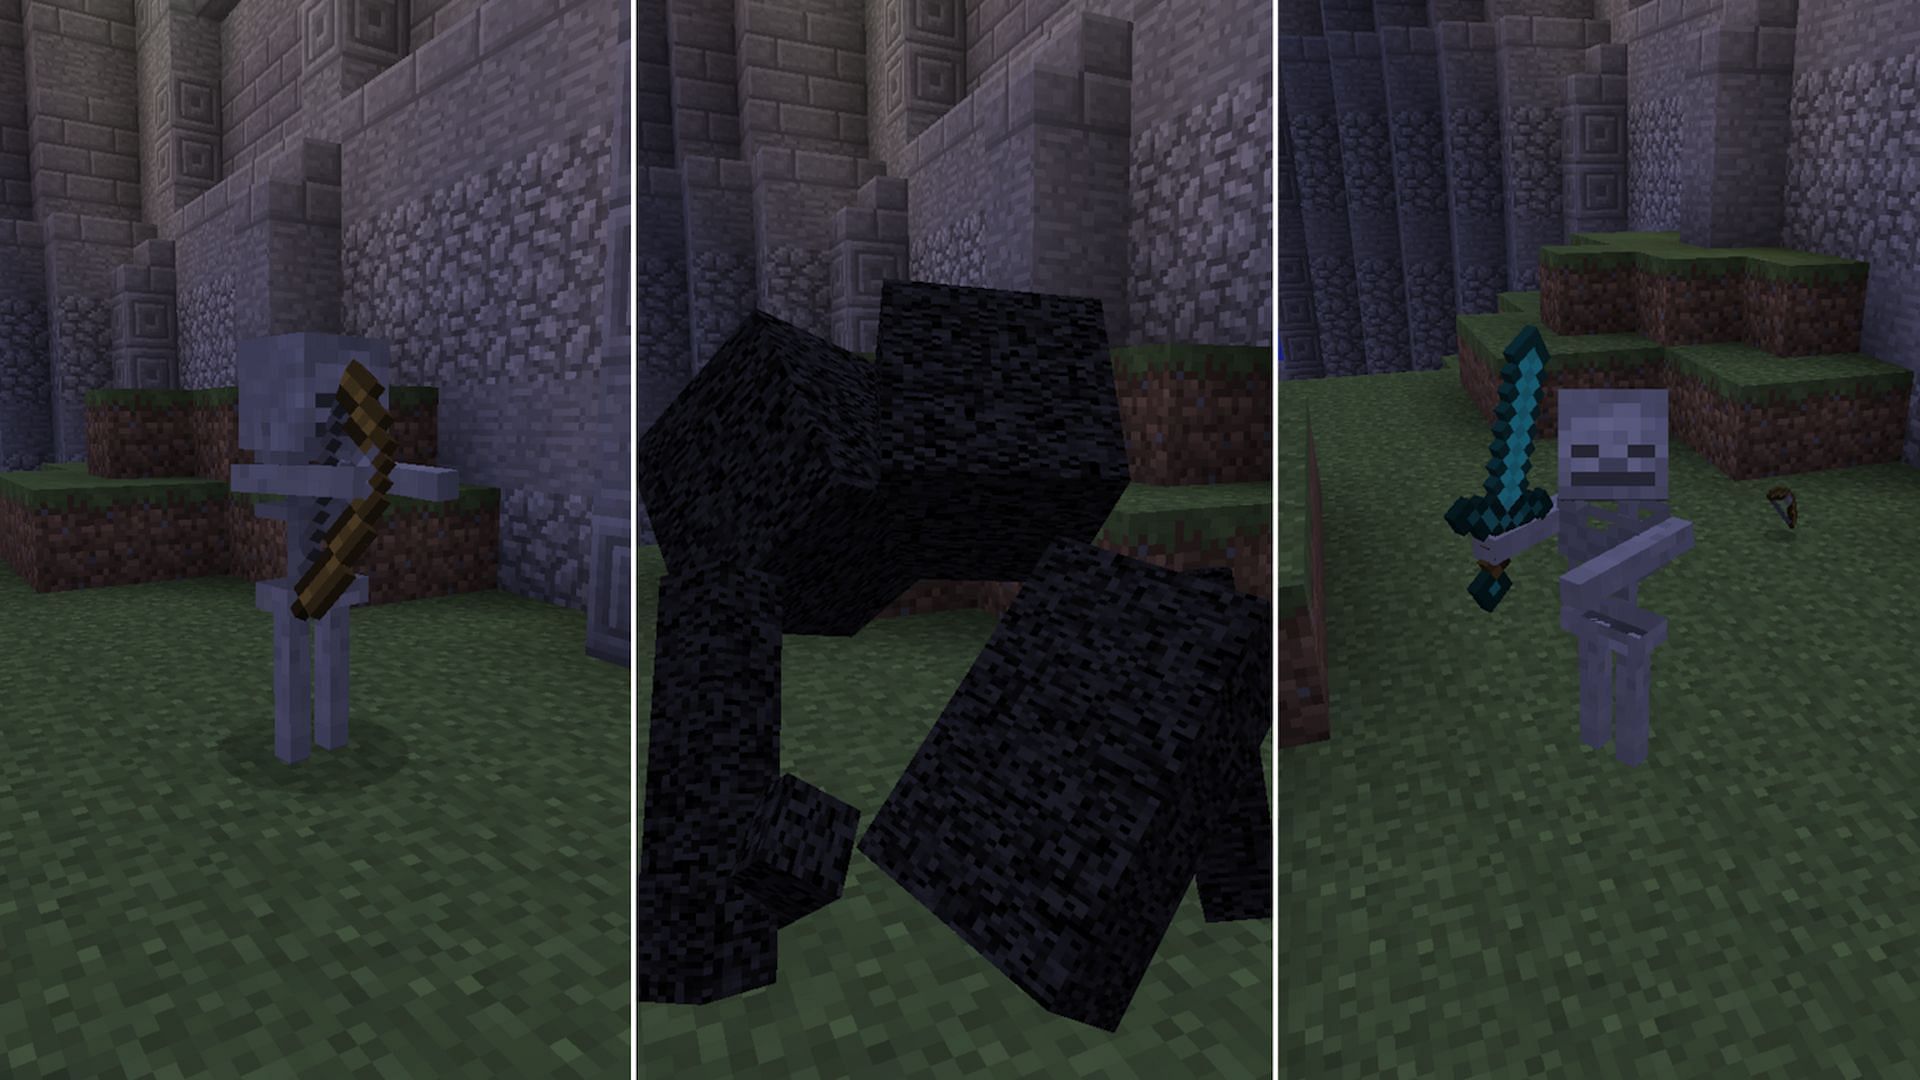 Players can change into mobs by absorbing their essence using the Morph mod (Image via www.minecraftmods.com)